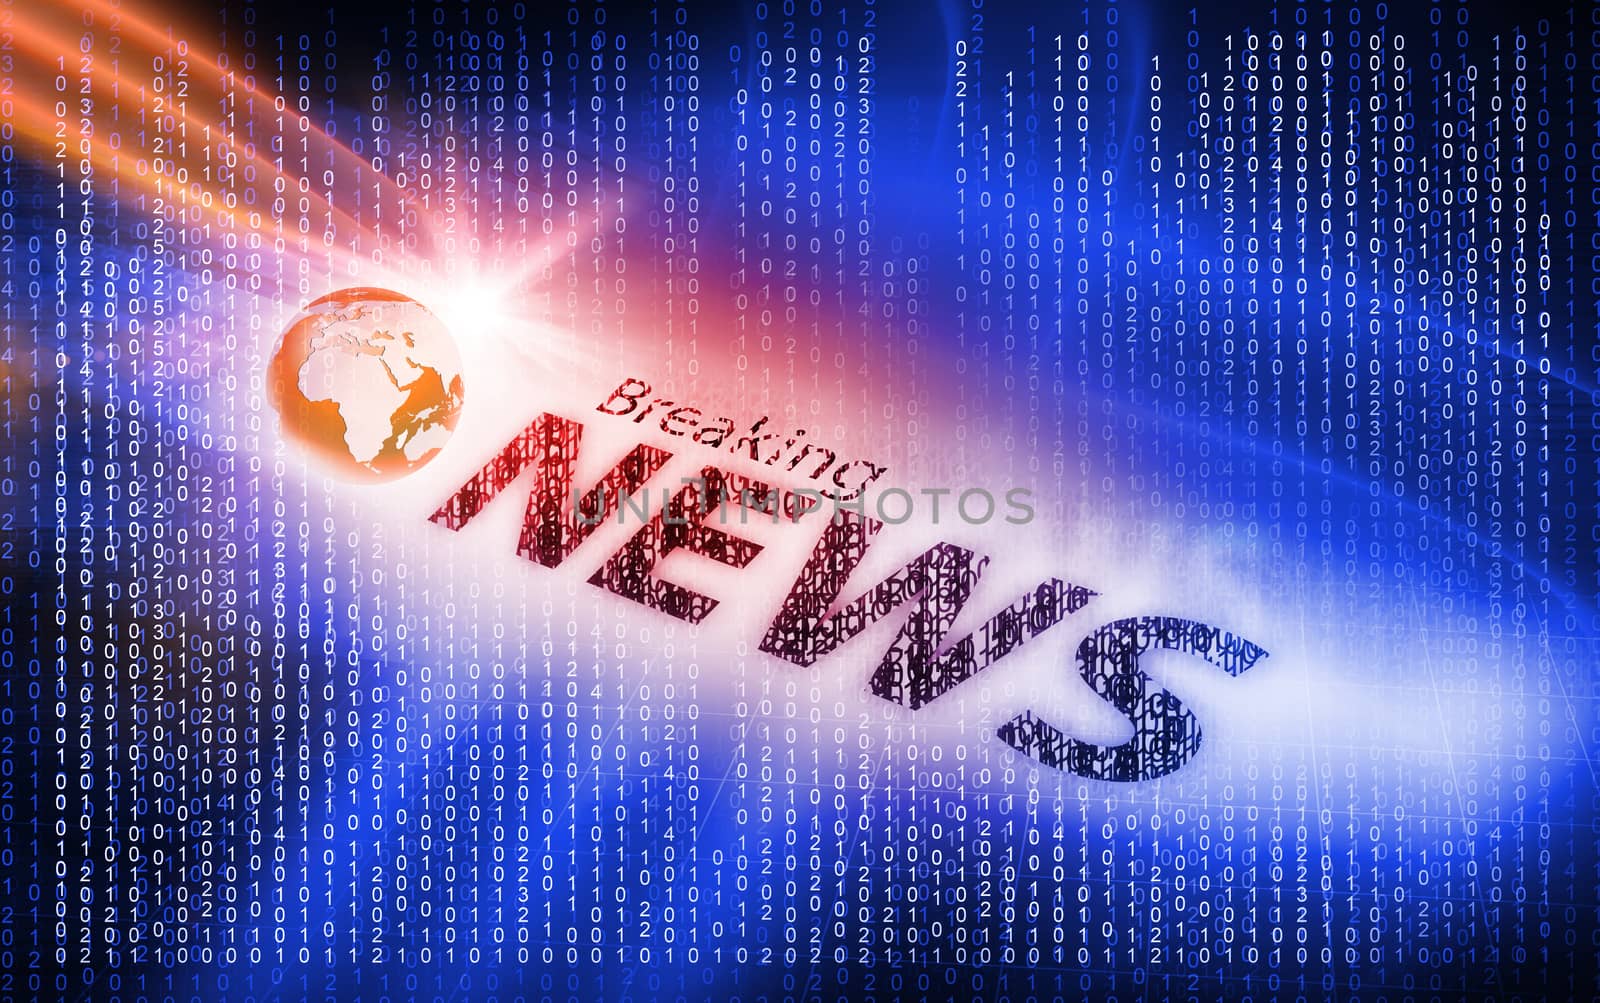 Graphical Digital Breaking News Background with Earth Globe and News text.